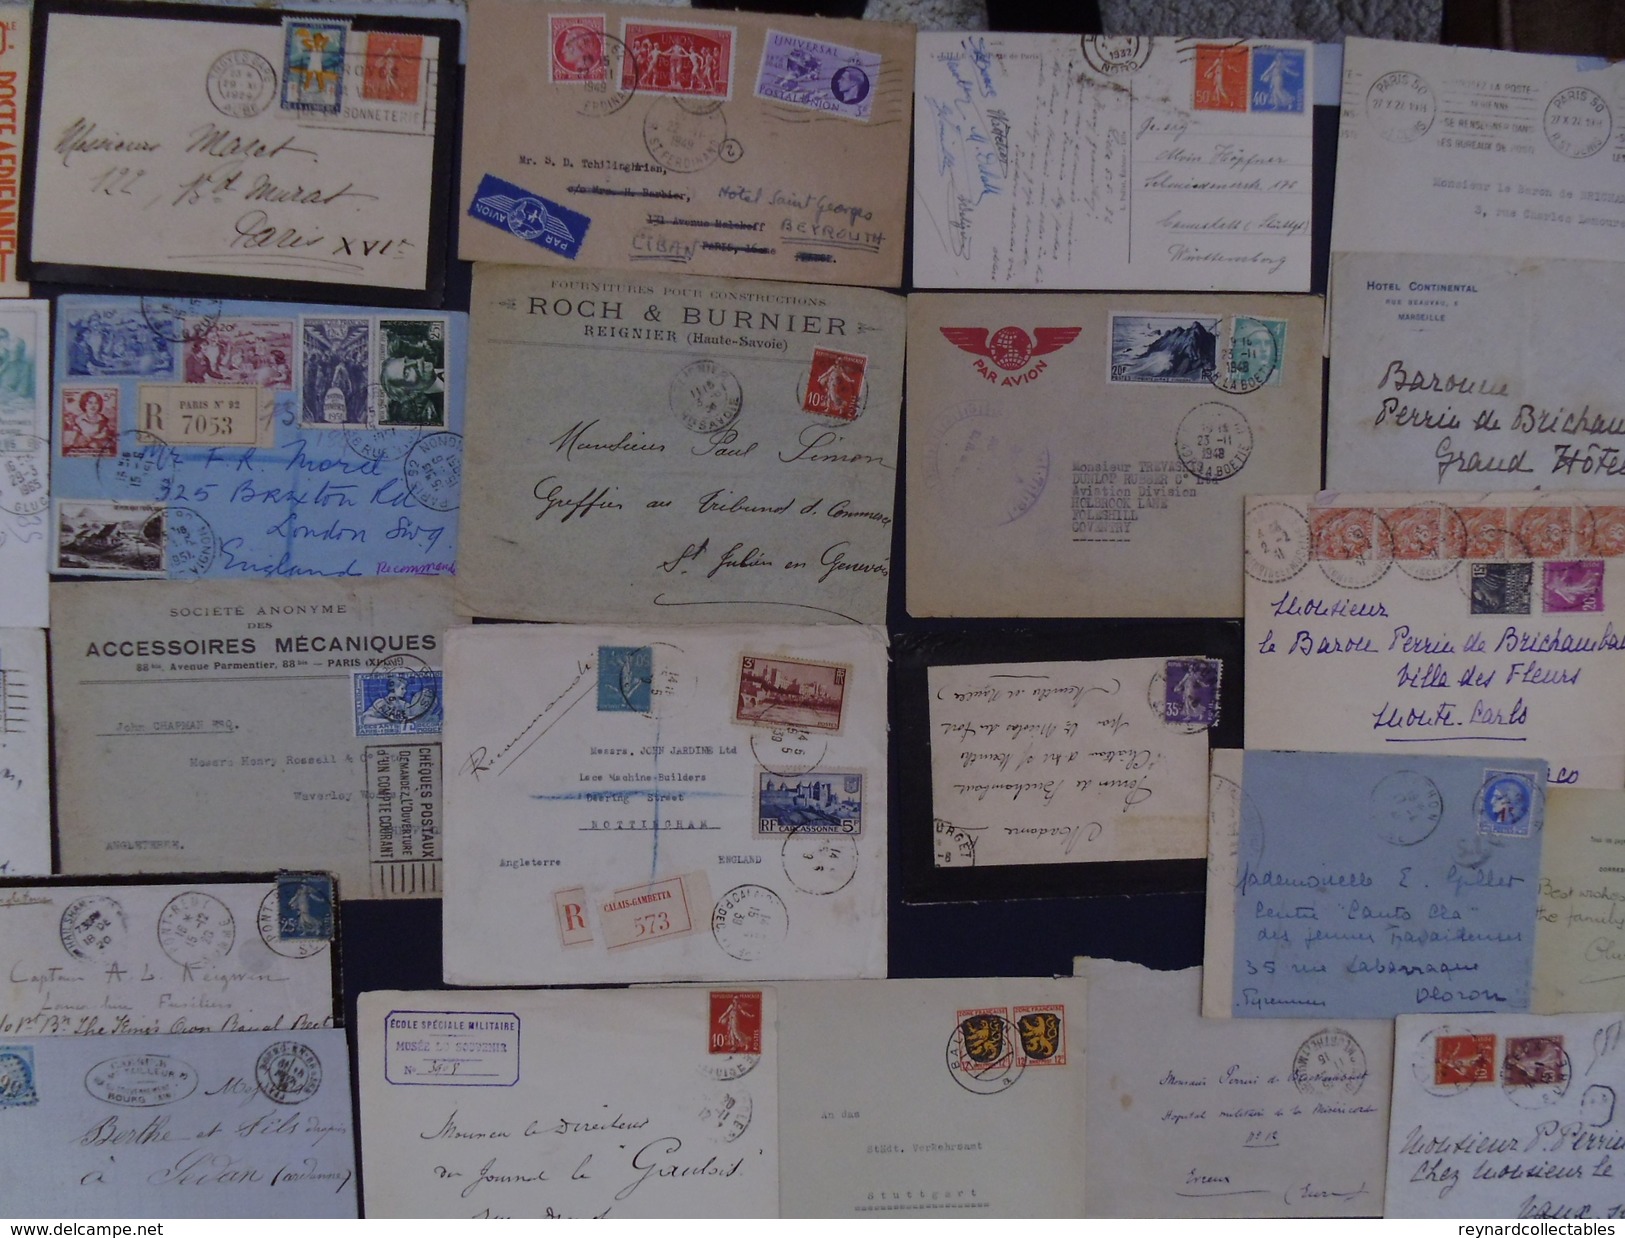 France very fine Postal History collection (290+ items). Pre-stamp, Classics, early fdcs,meter marks,Foire+++